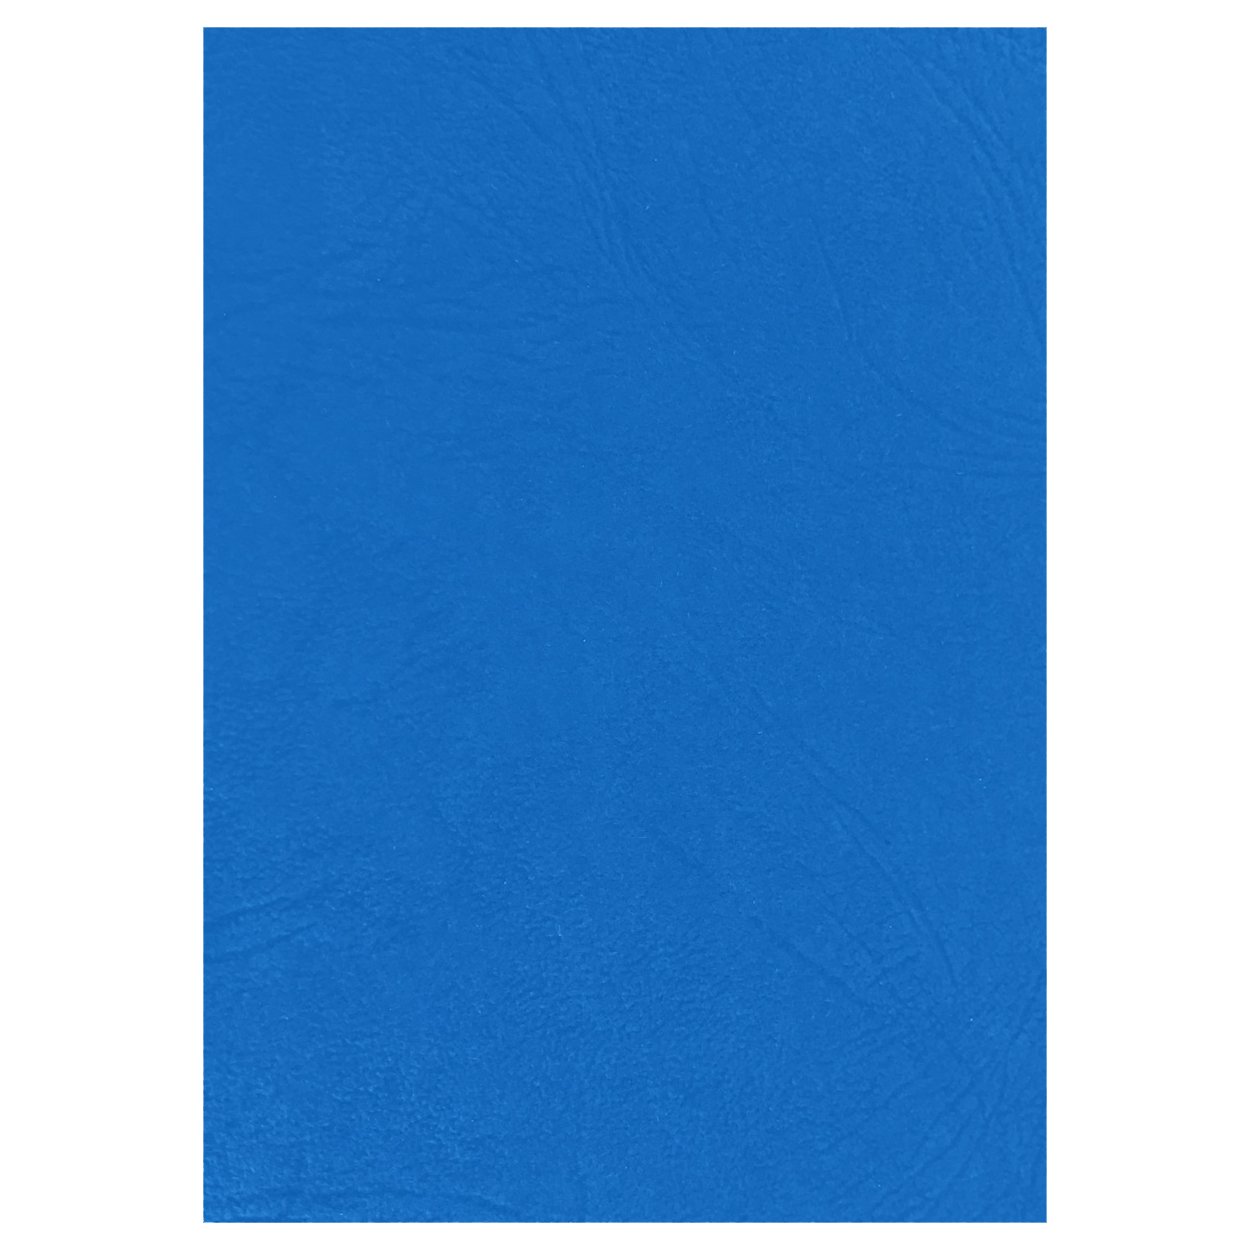 A4 Leathergrain Covers 280gsm - Blue (Pkt 100) - Click Image to Close